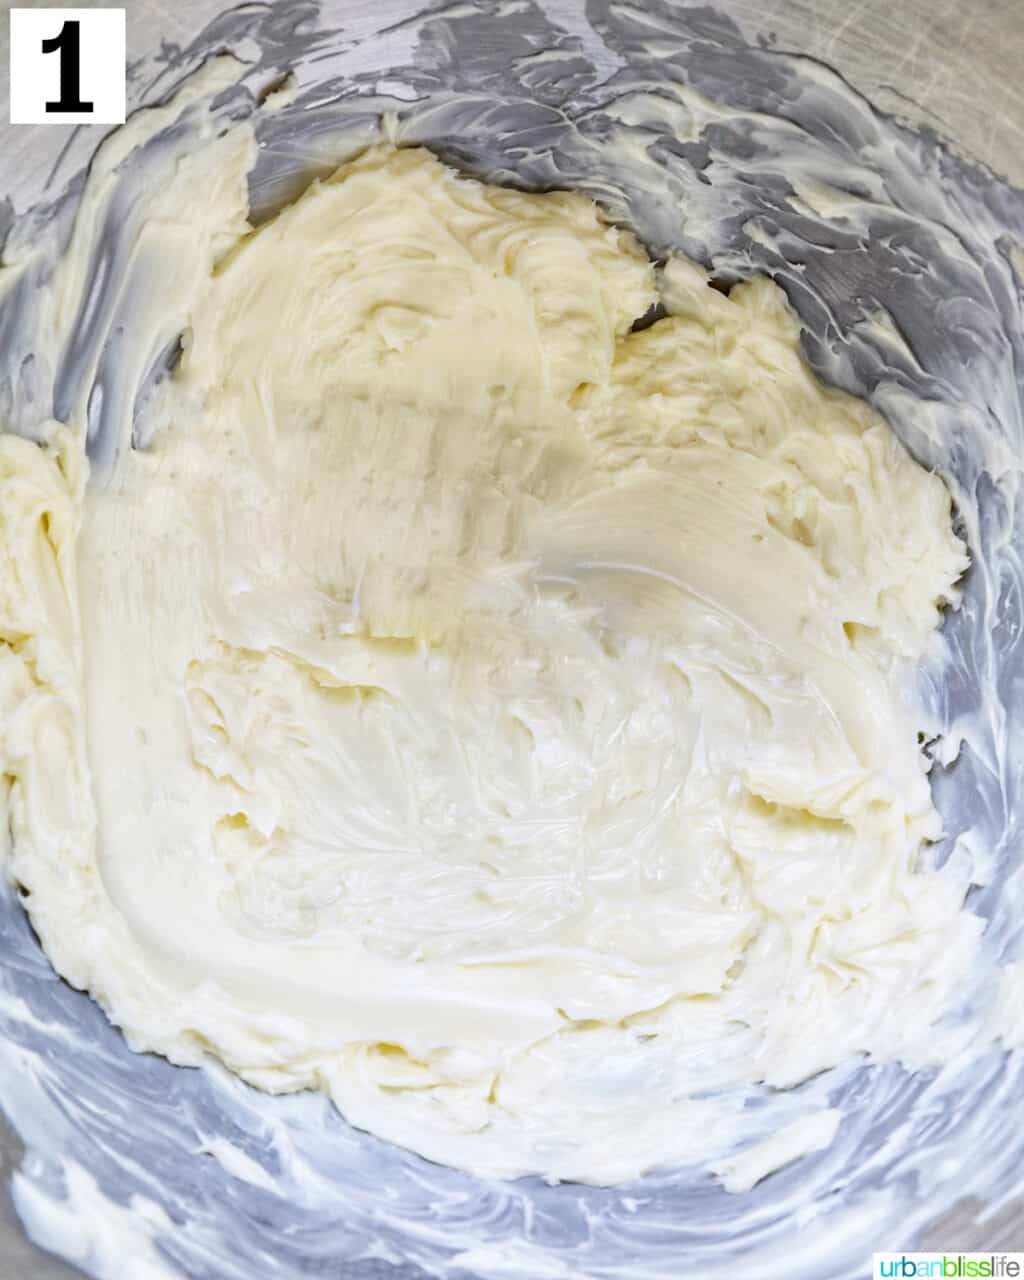 Creaming butter in the stainless steel bowl of a stand mixer.